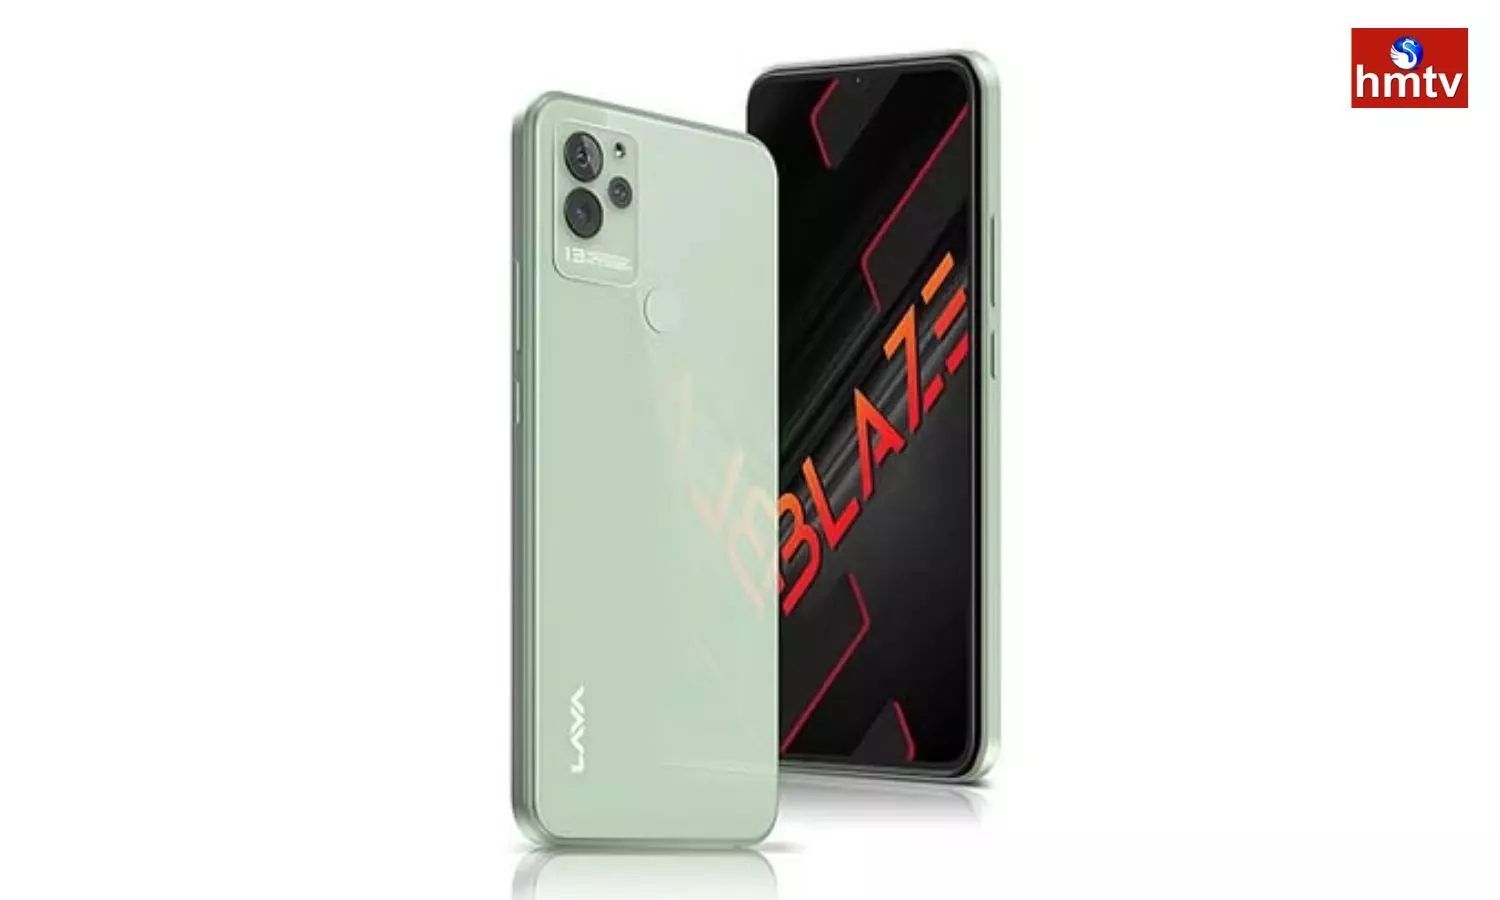 Lava Blaze 5g Smartphone how About the Price Features